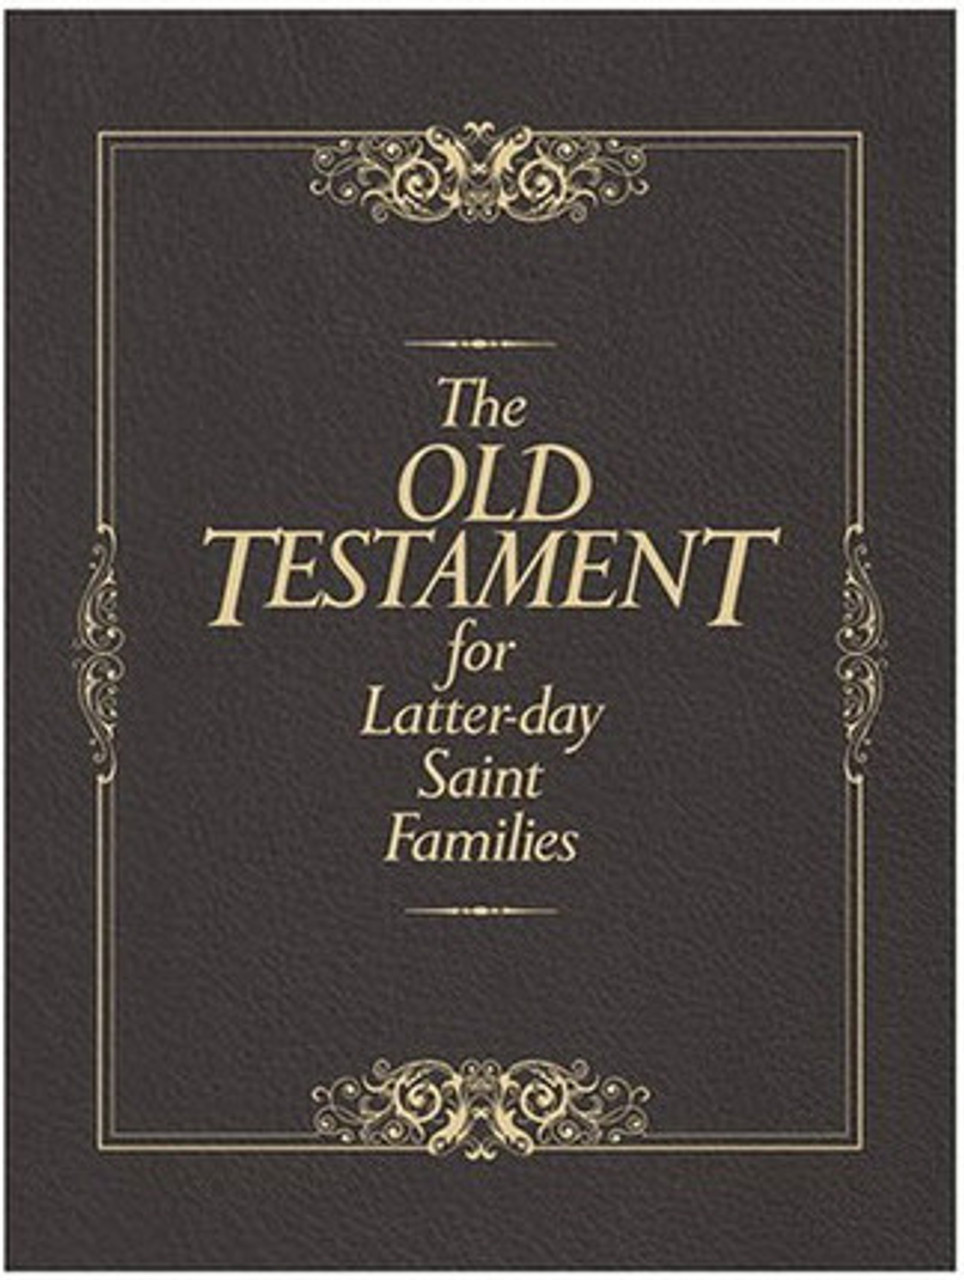 The Old Testament for Latter-day Saint Families (Hardcover) *